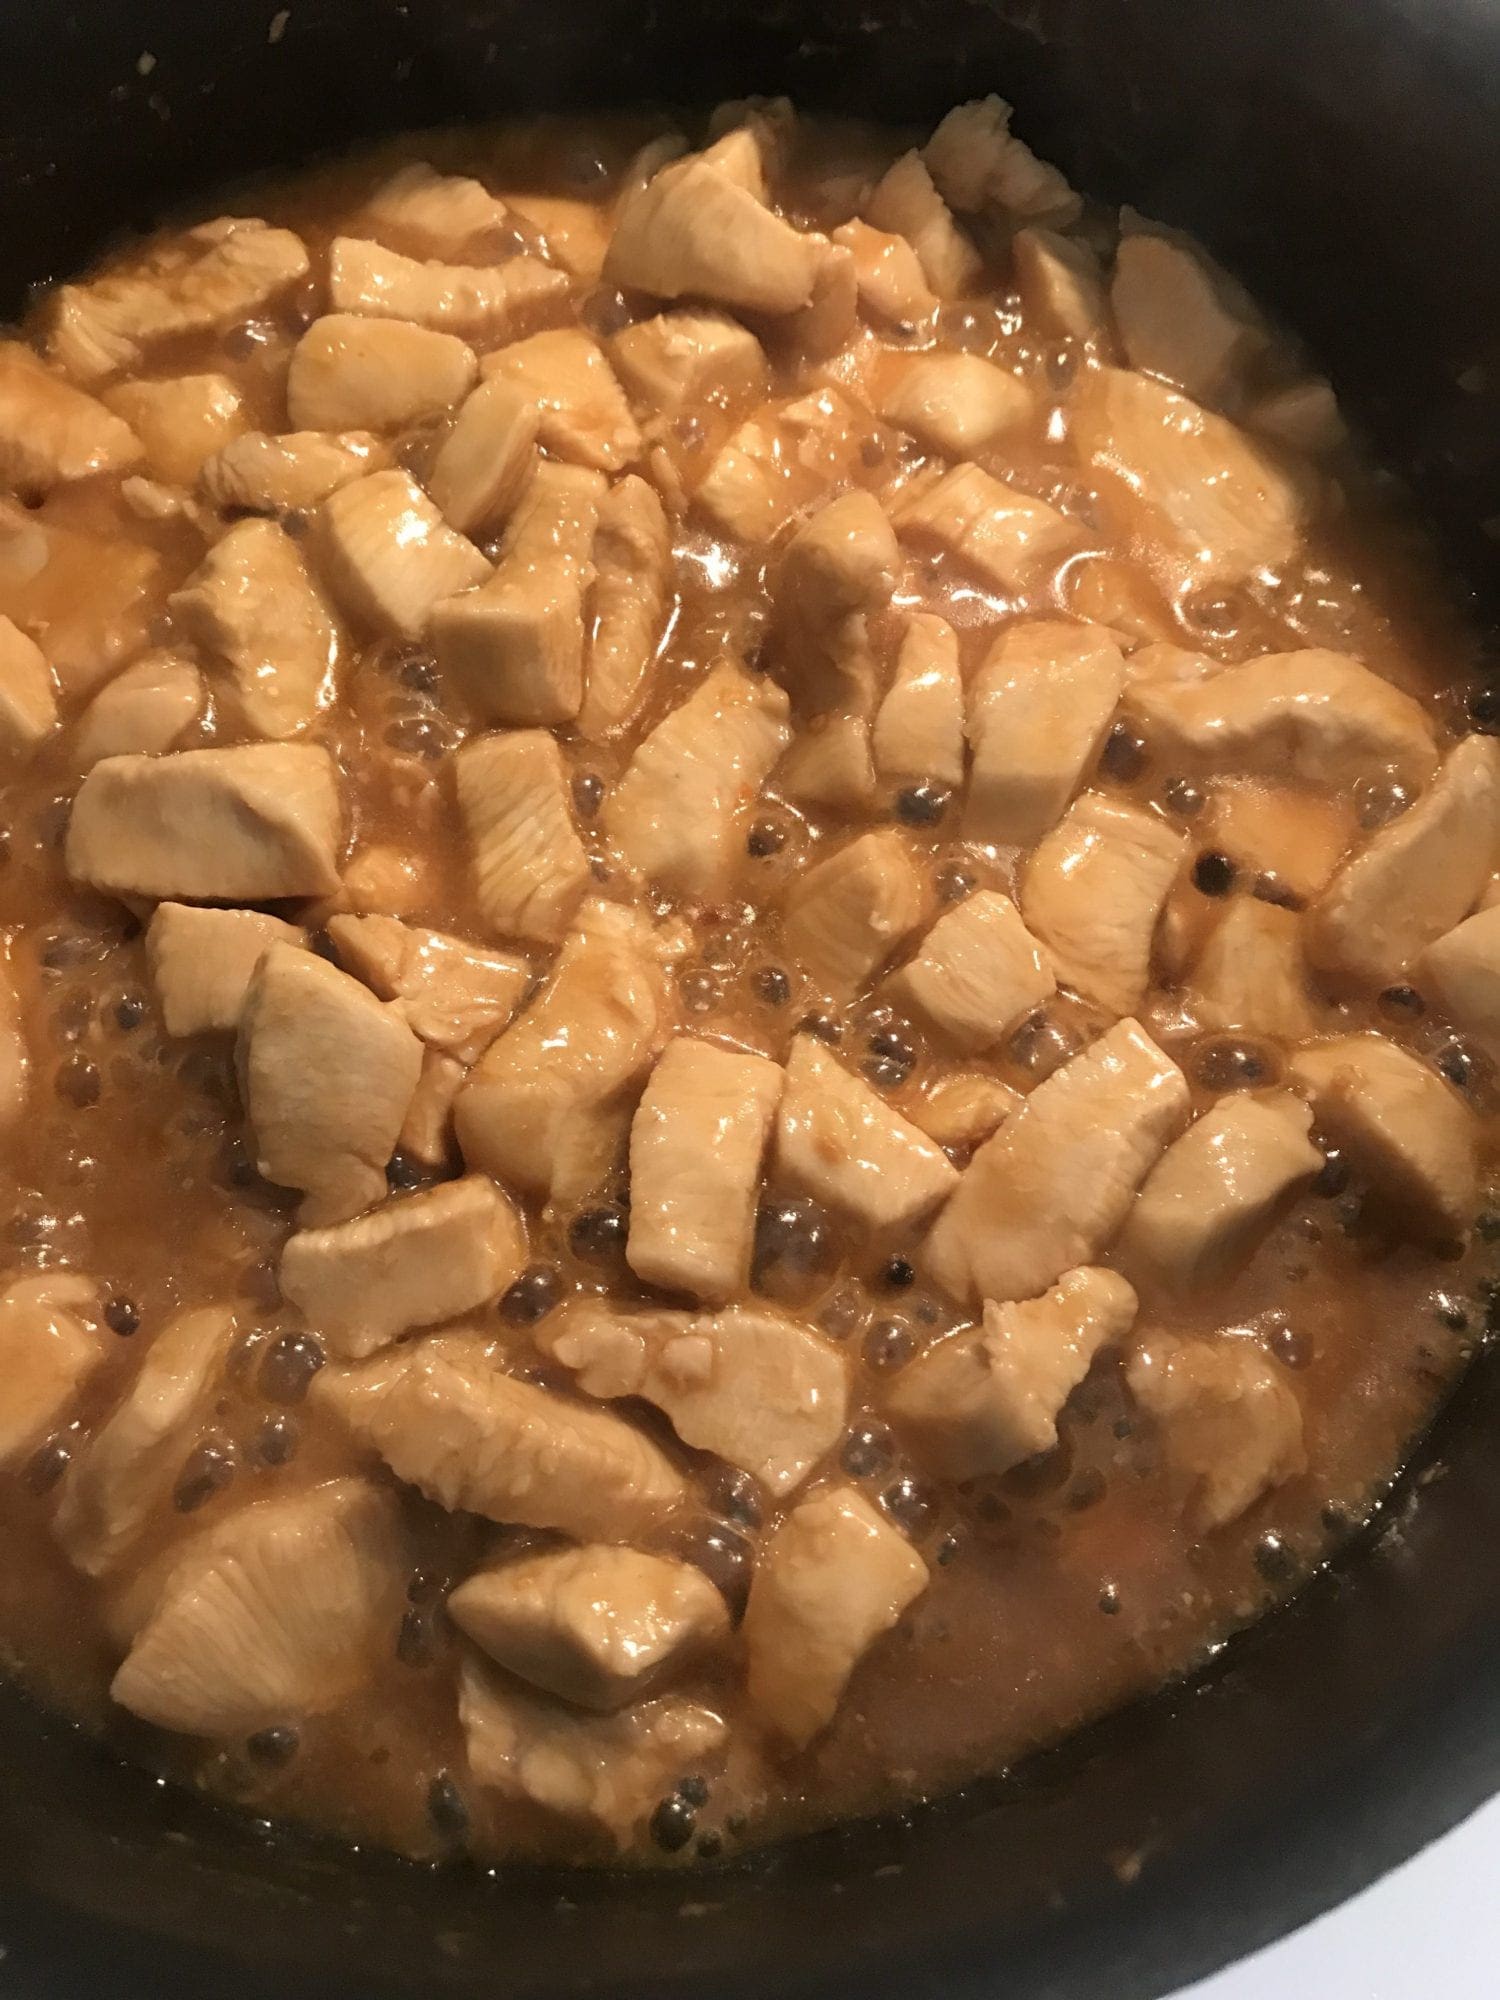 Chicken cooking in a sweet and soy sauce made of simple ingredients you probably already have.